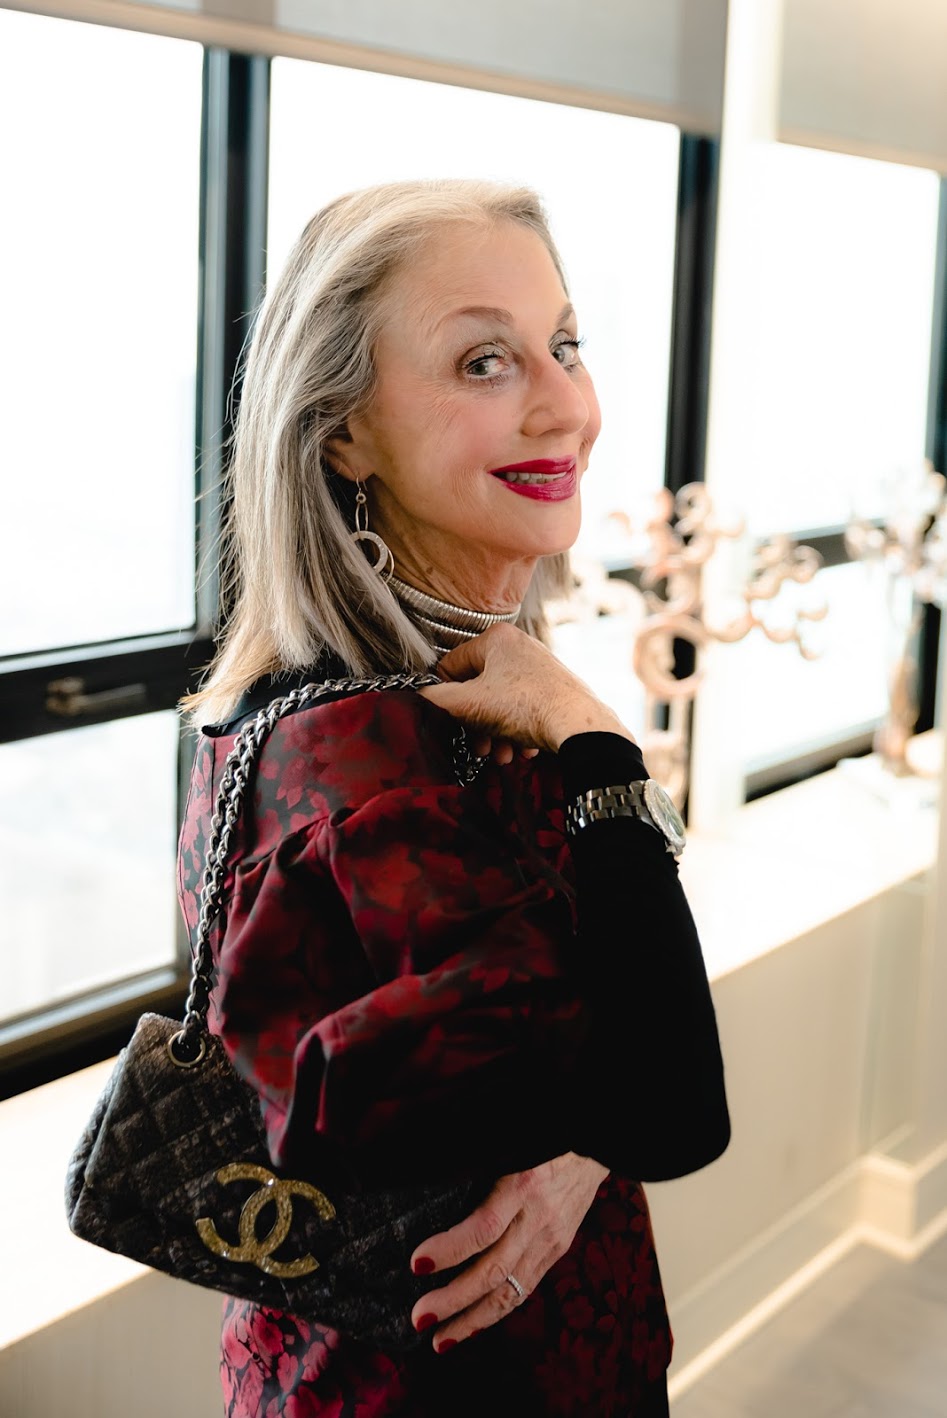 Woman (Honey Good) with Gray Hair smiling and holding Chanel bag over shoulder. 